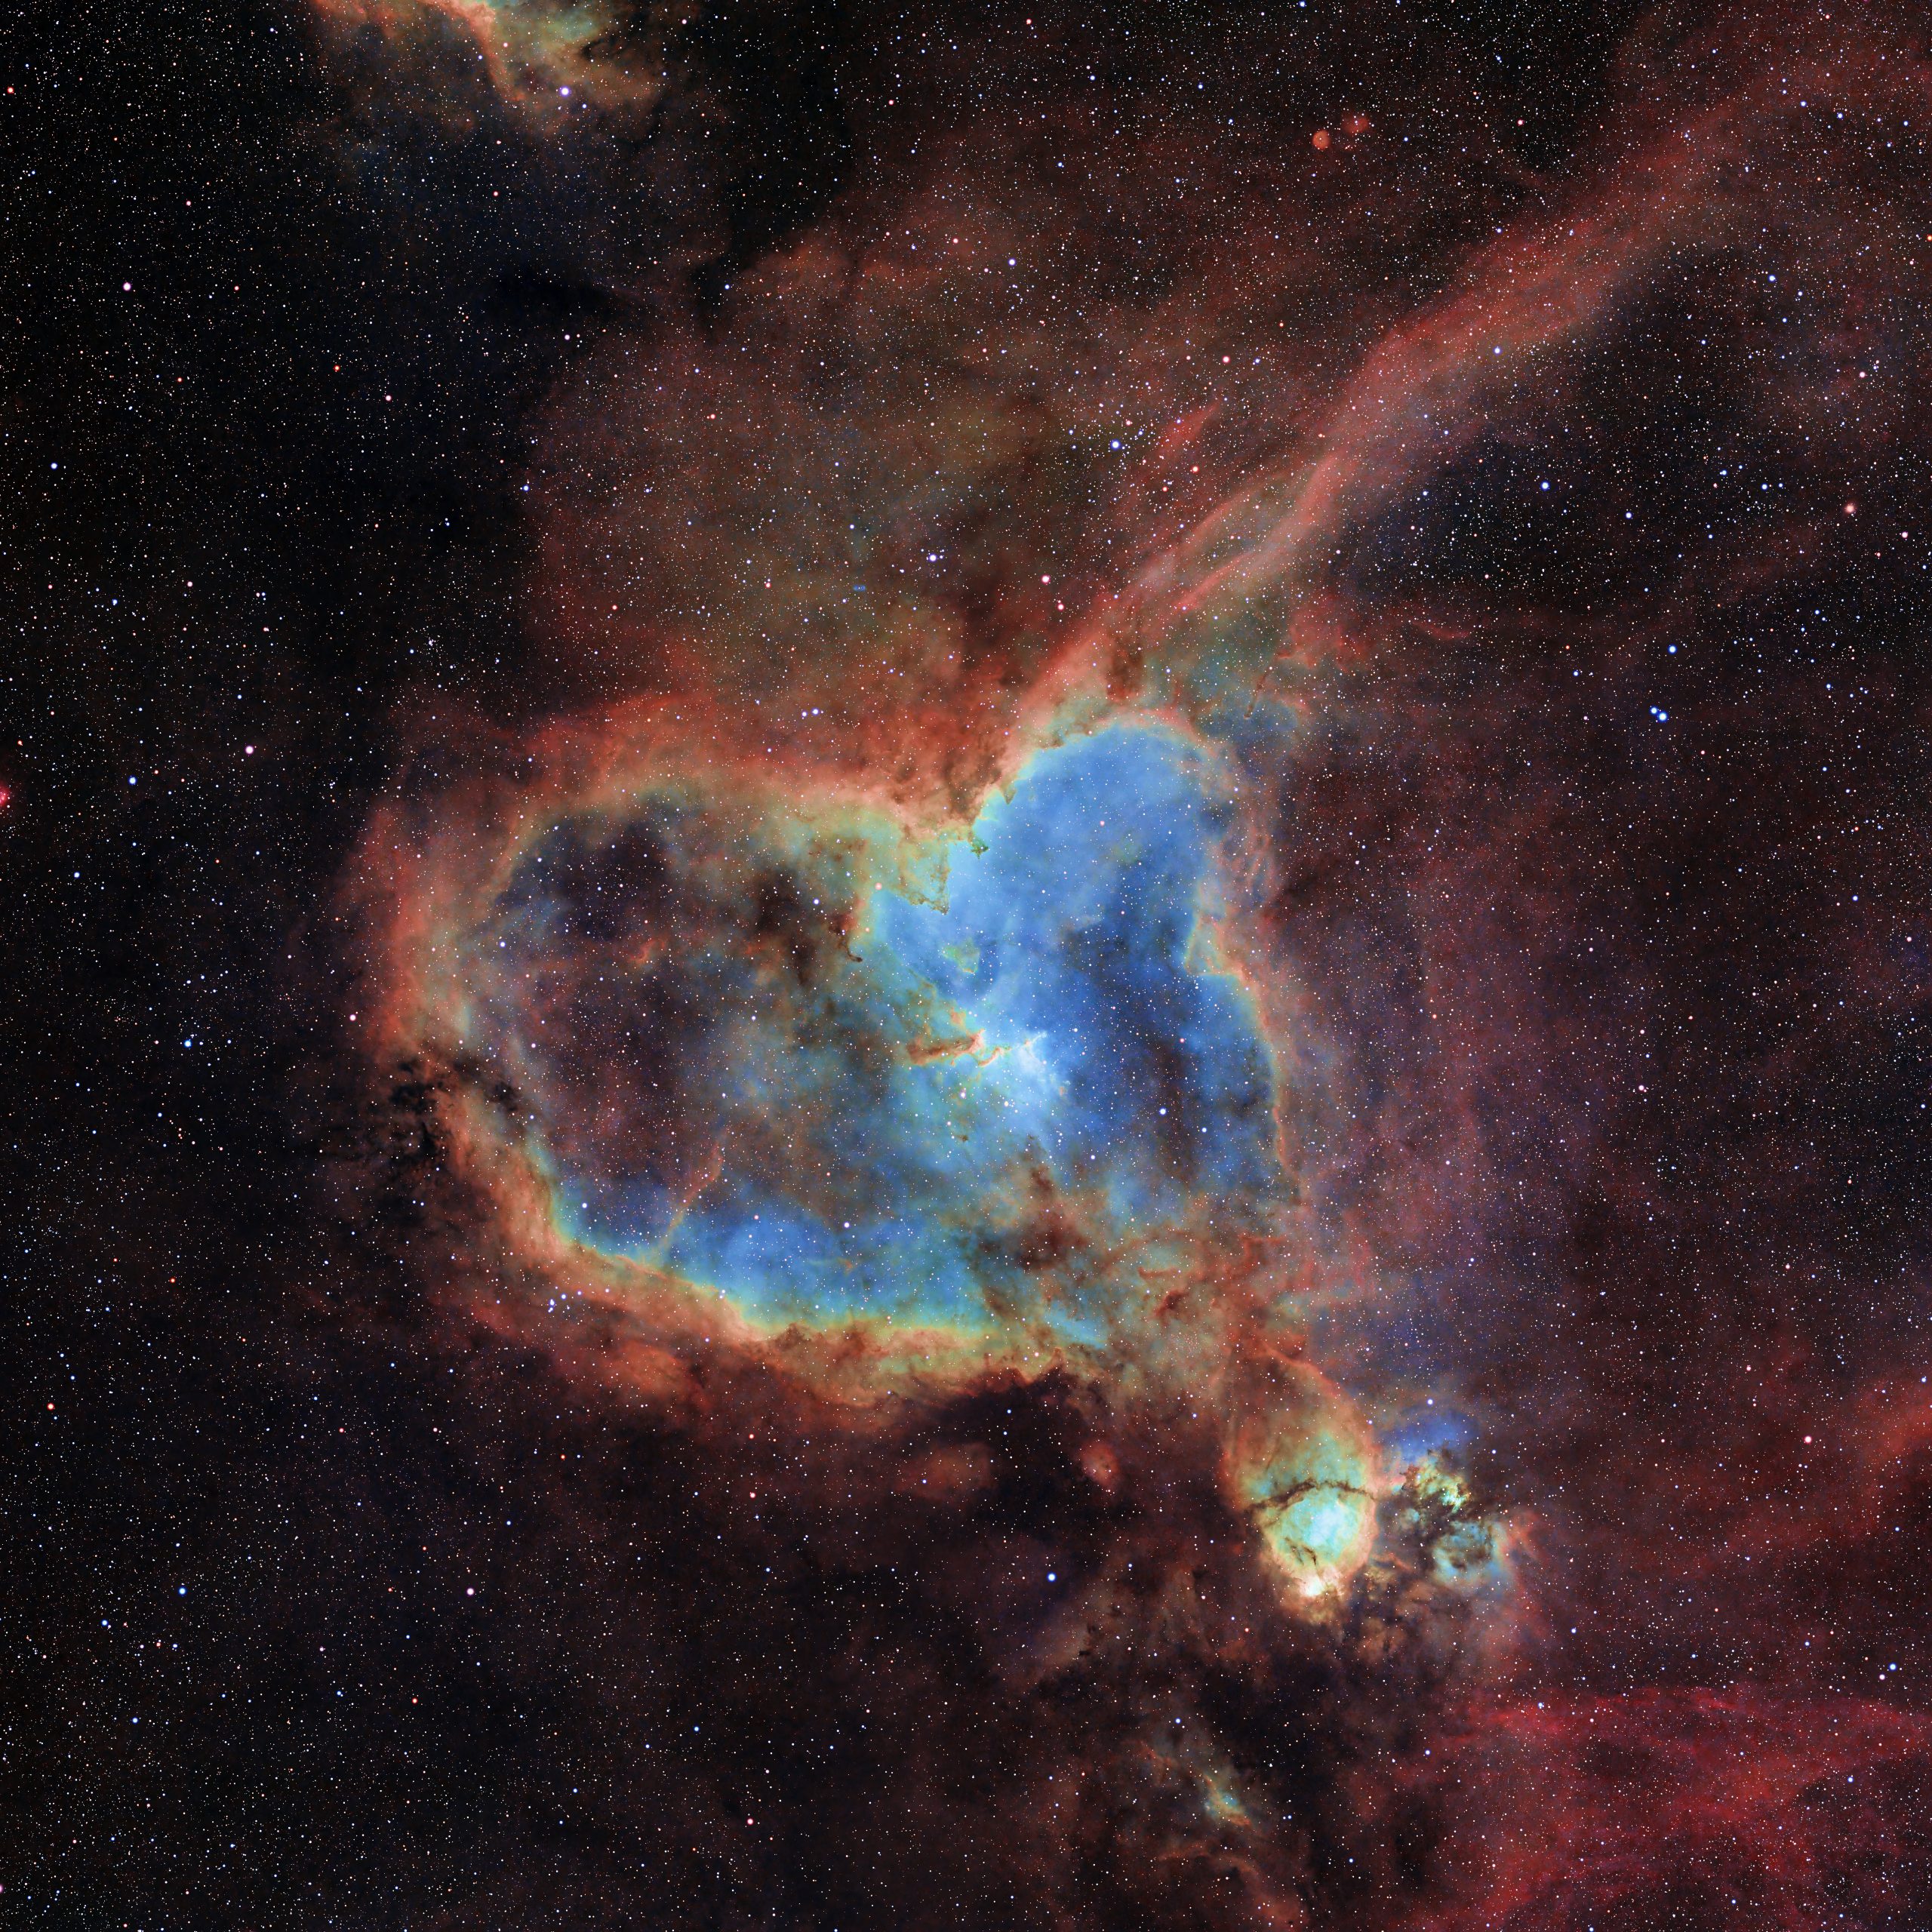 Daily Telescope: A colorful heart with a blue core